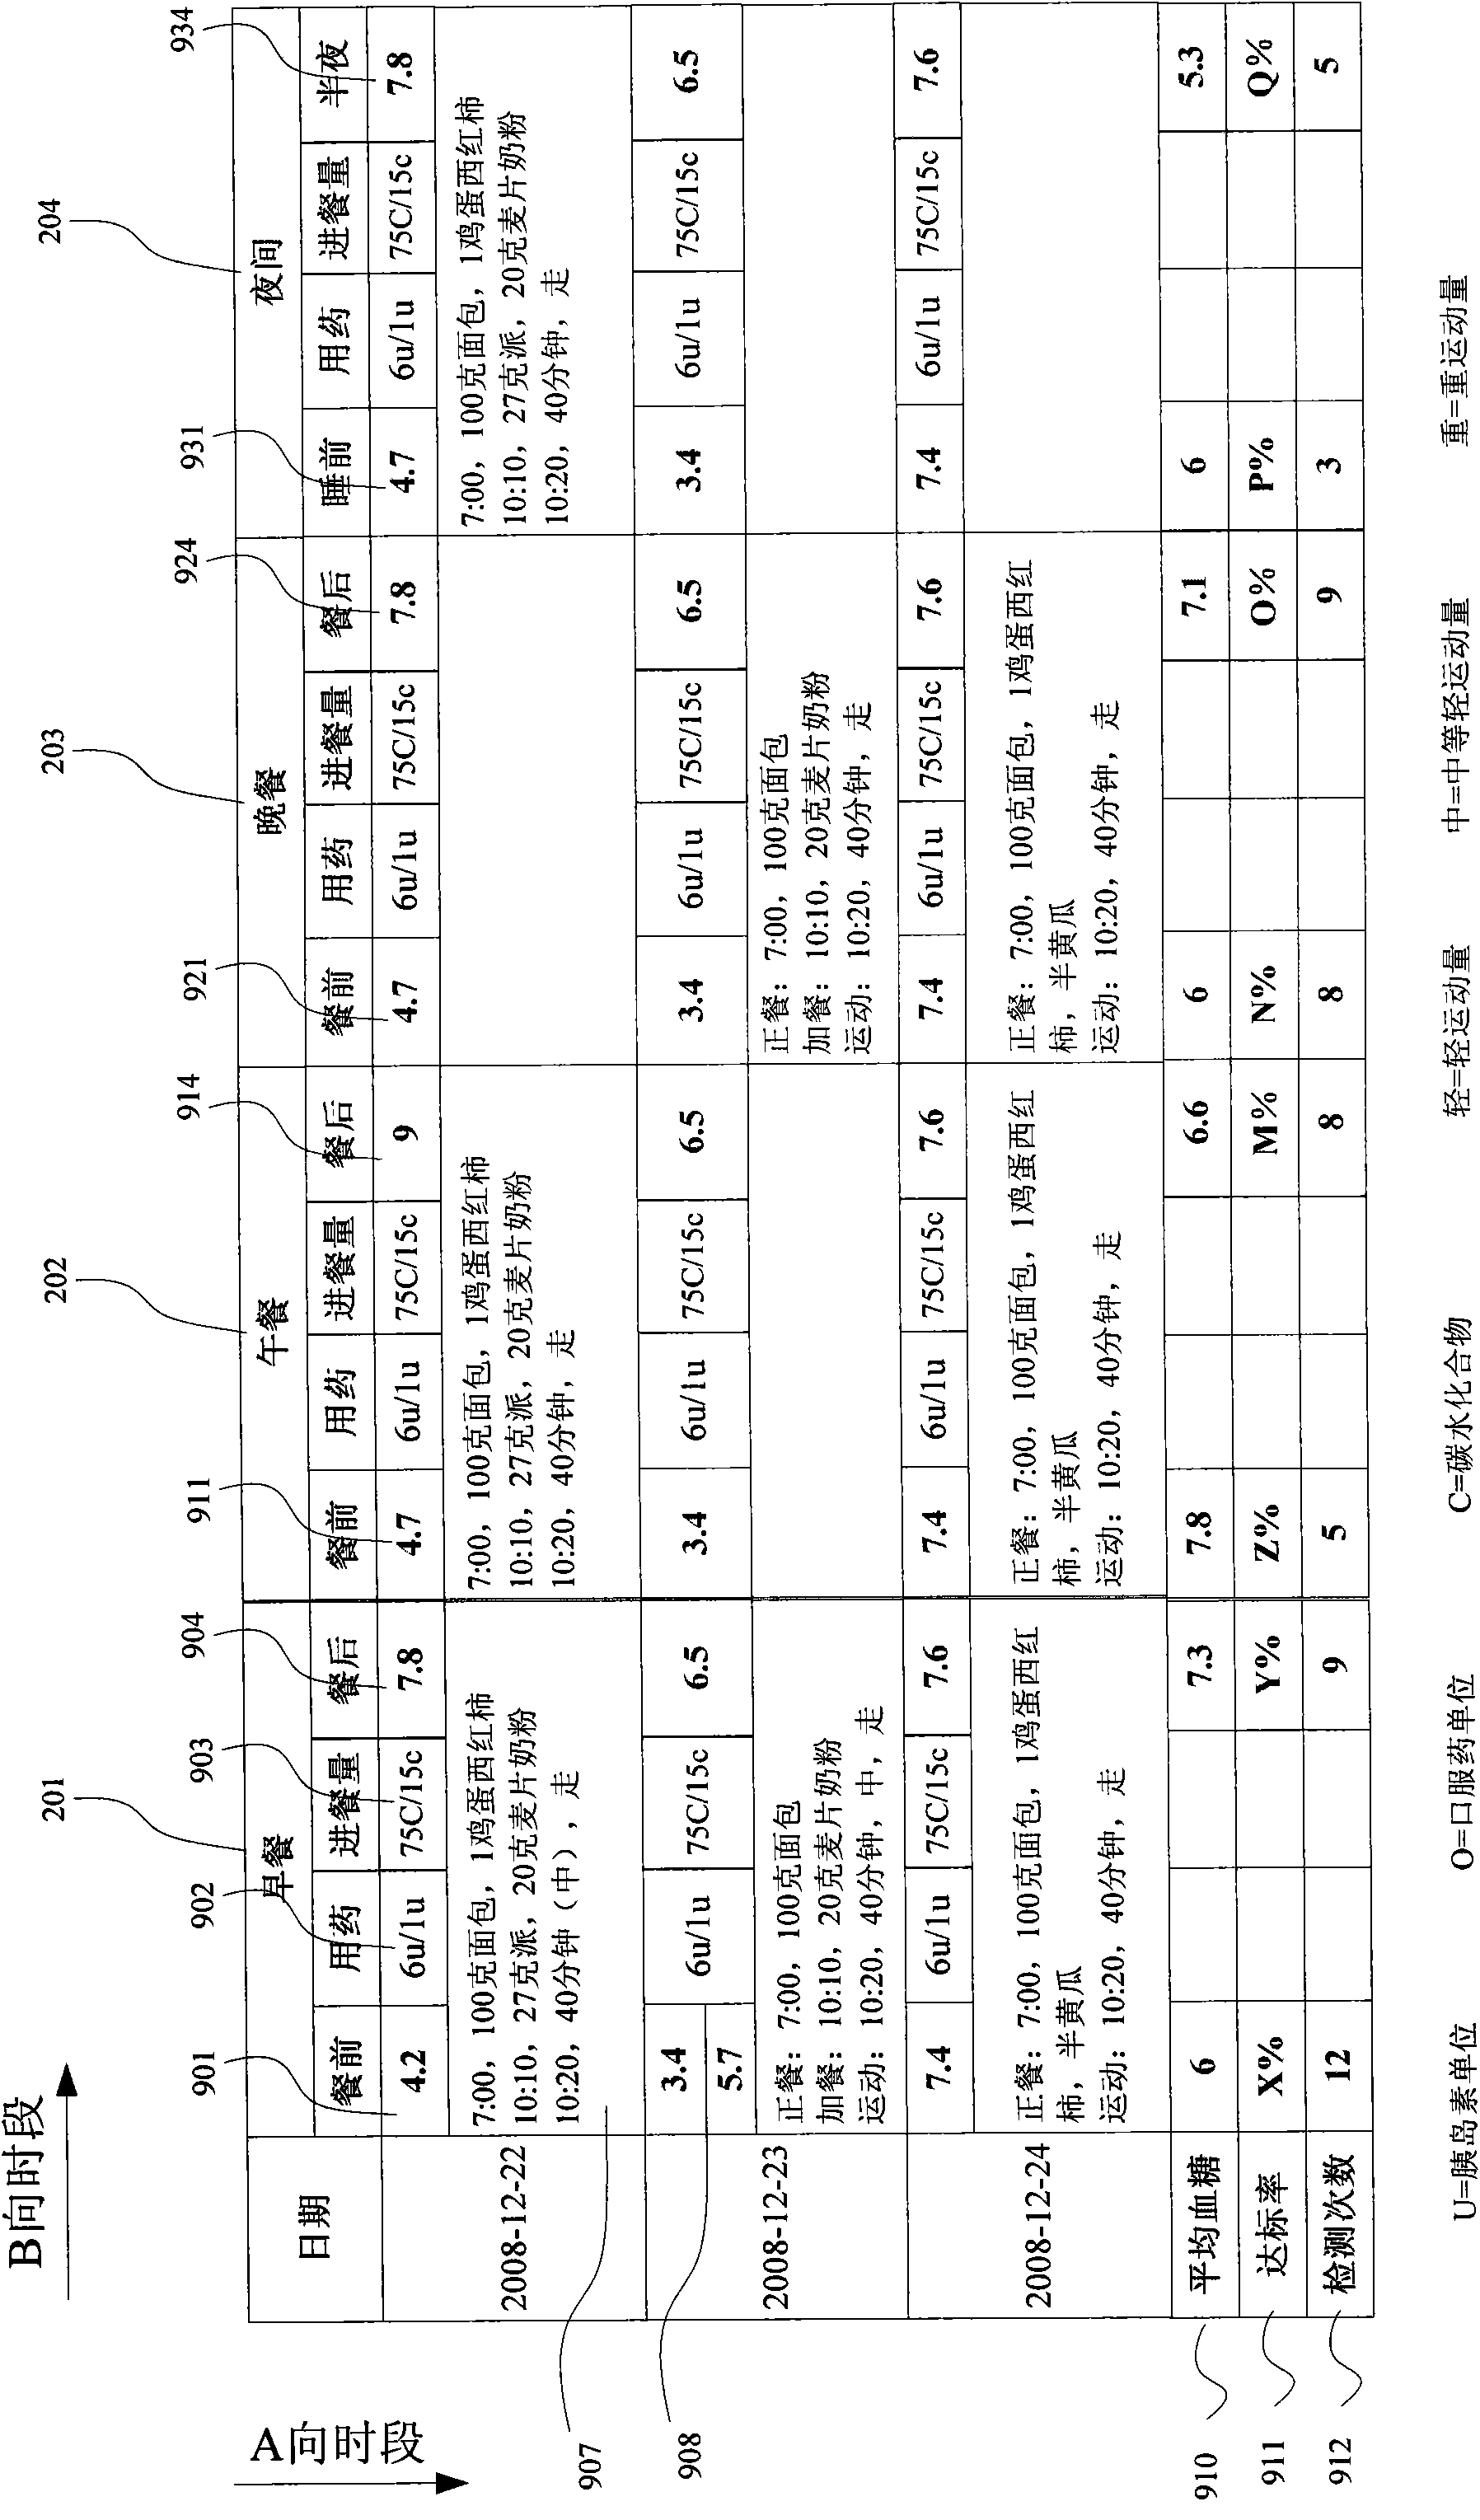 Health information display and control device and method, corresponding equipment and reagent carrier